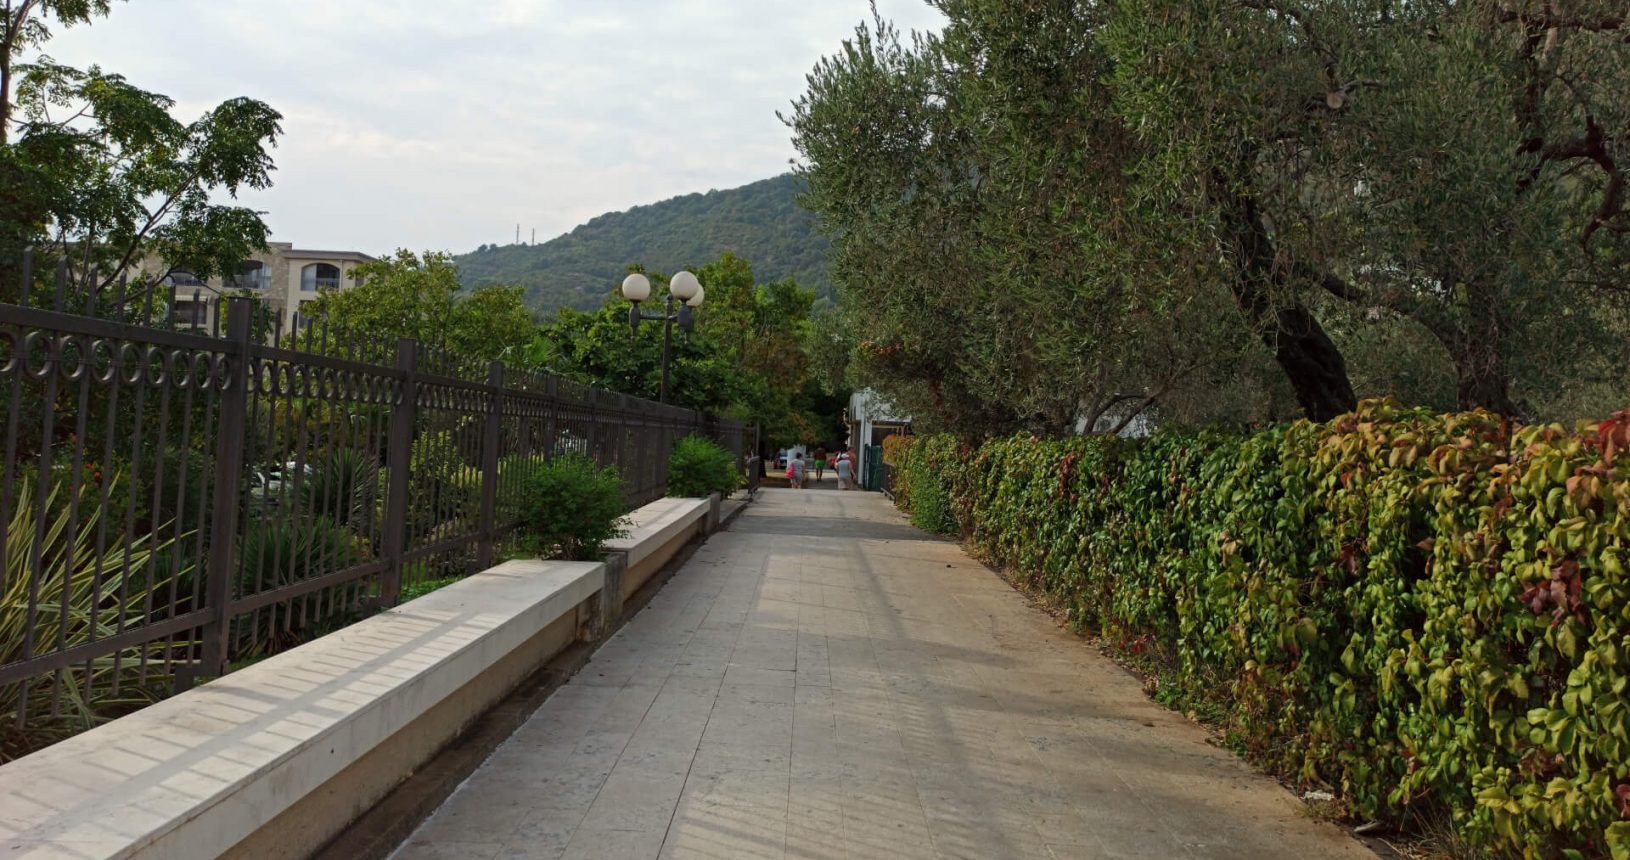 A lot of trees and nature in Petrovac